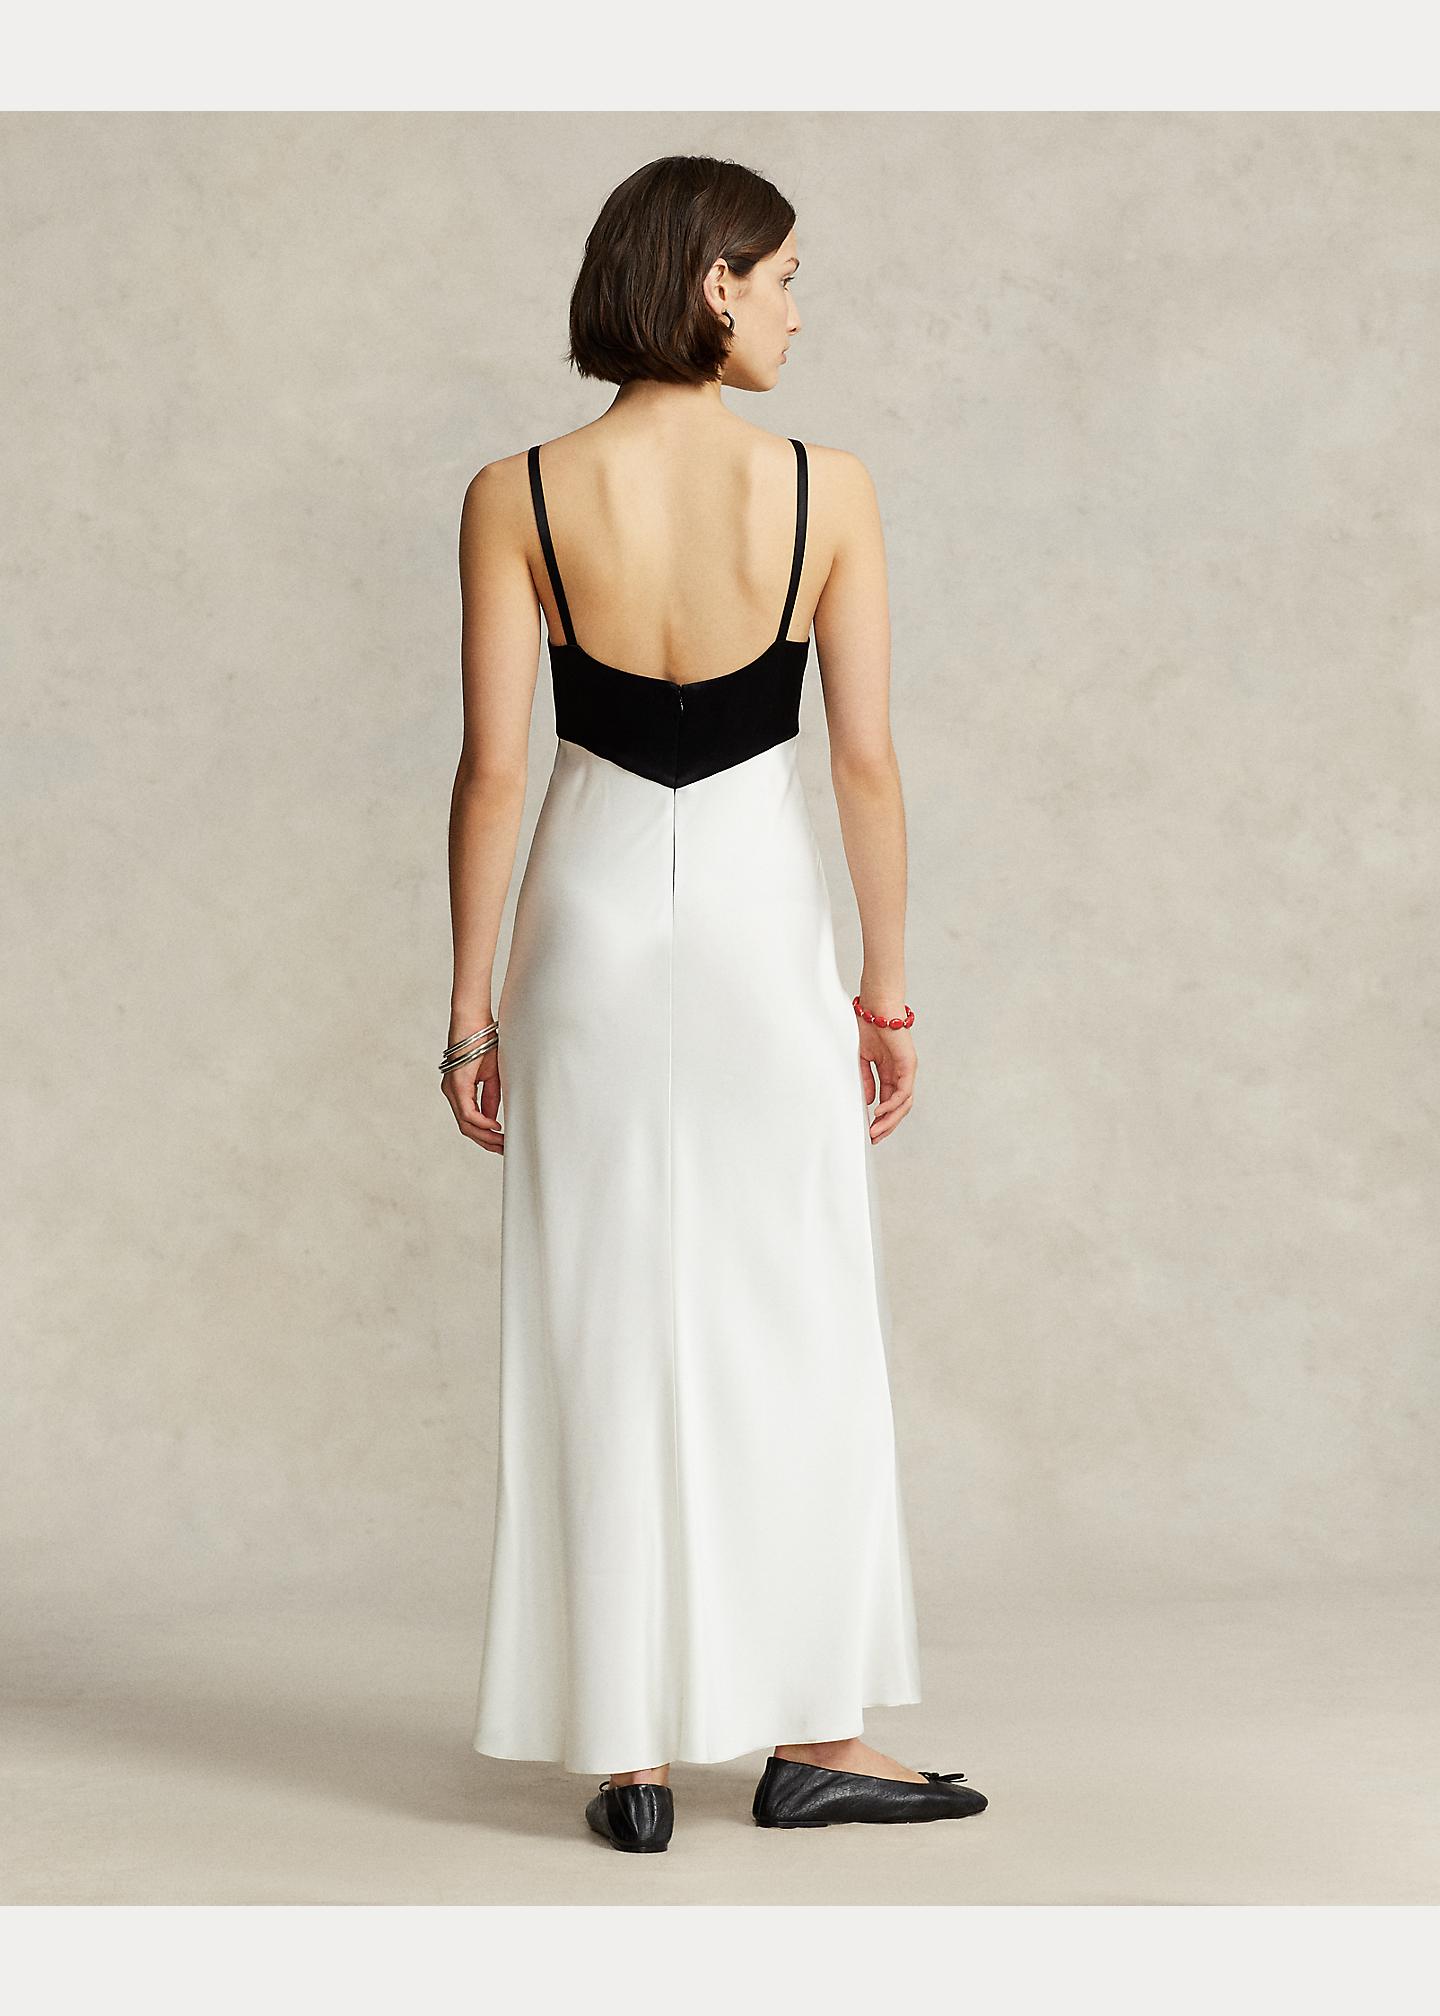 Polo Ralph Lauren Contrast Satin Sleeveless Gown in White | Lyst UK